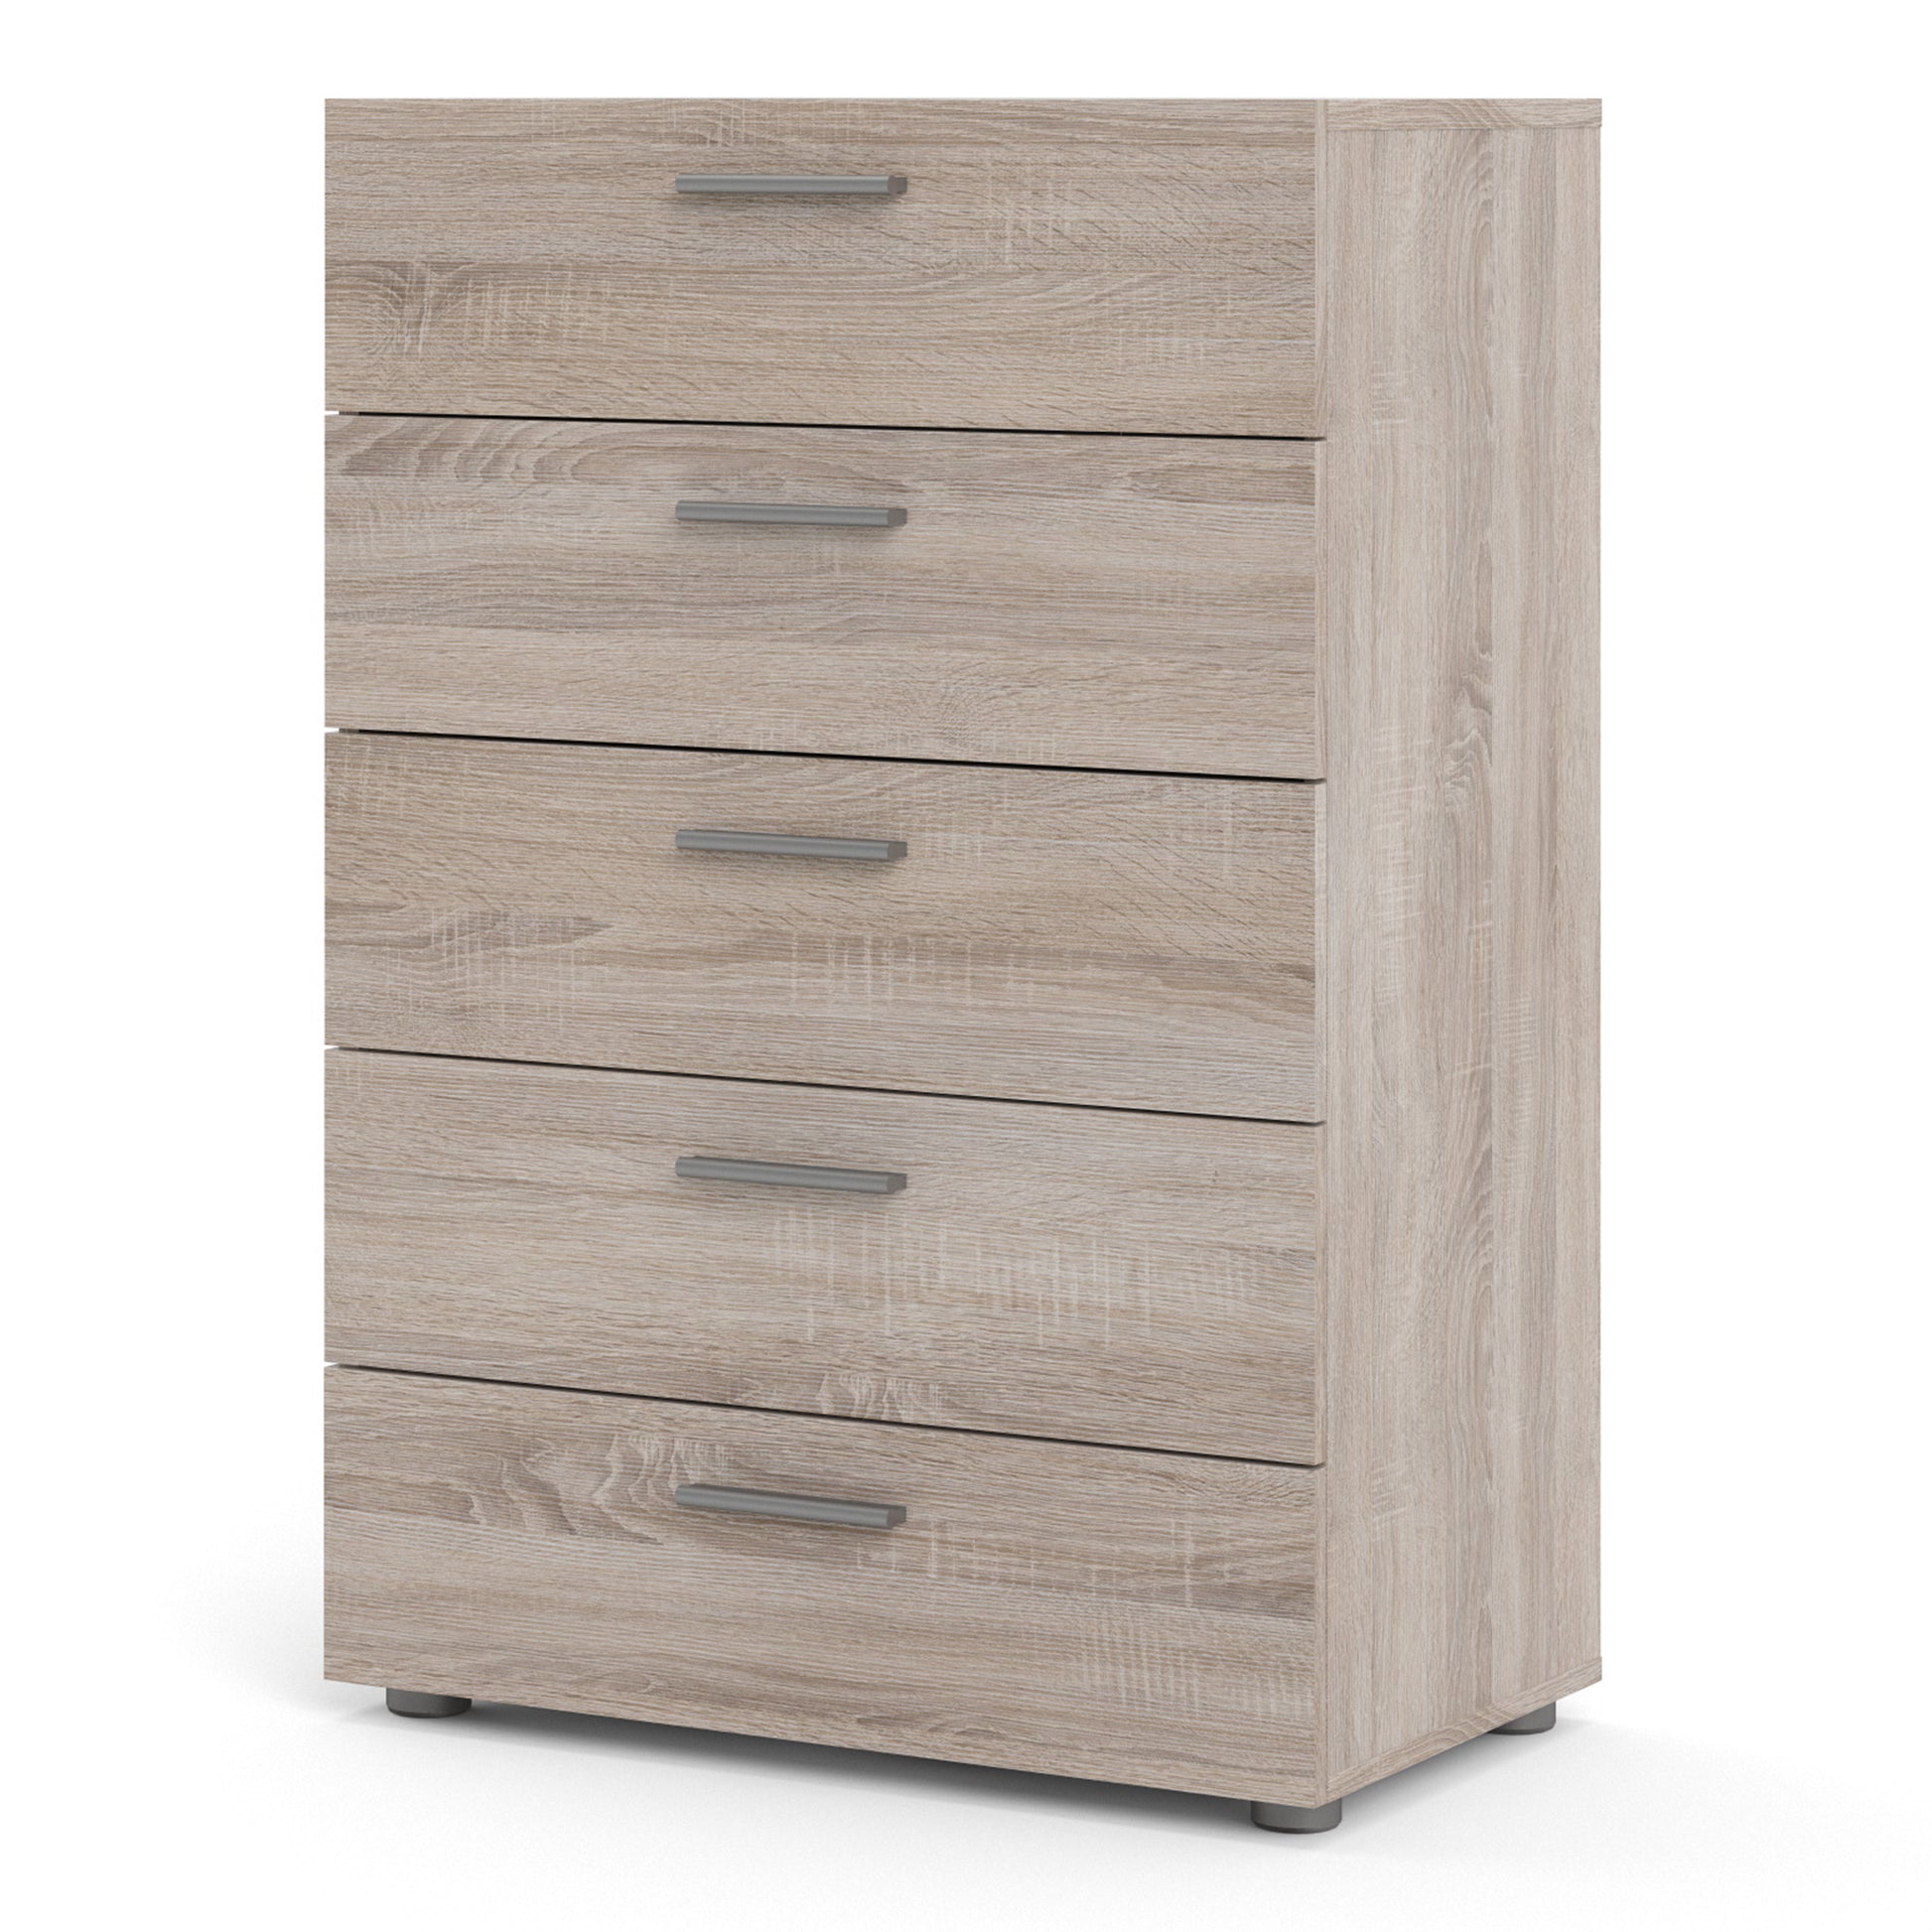 Pepe  Chest of 5 Drawers in Truffle Oak